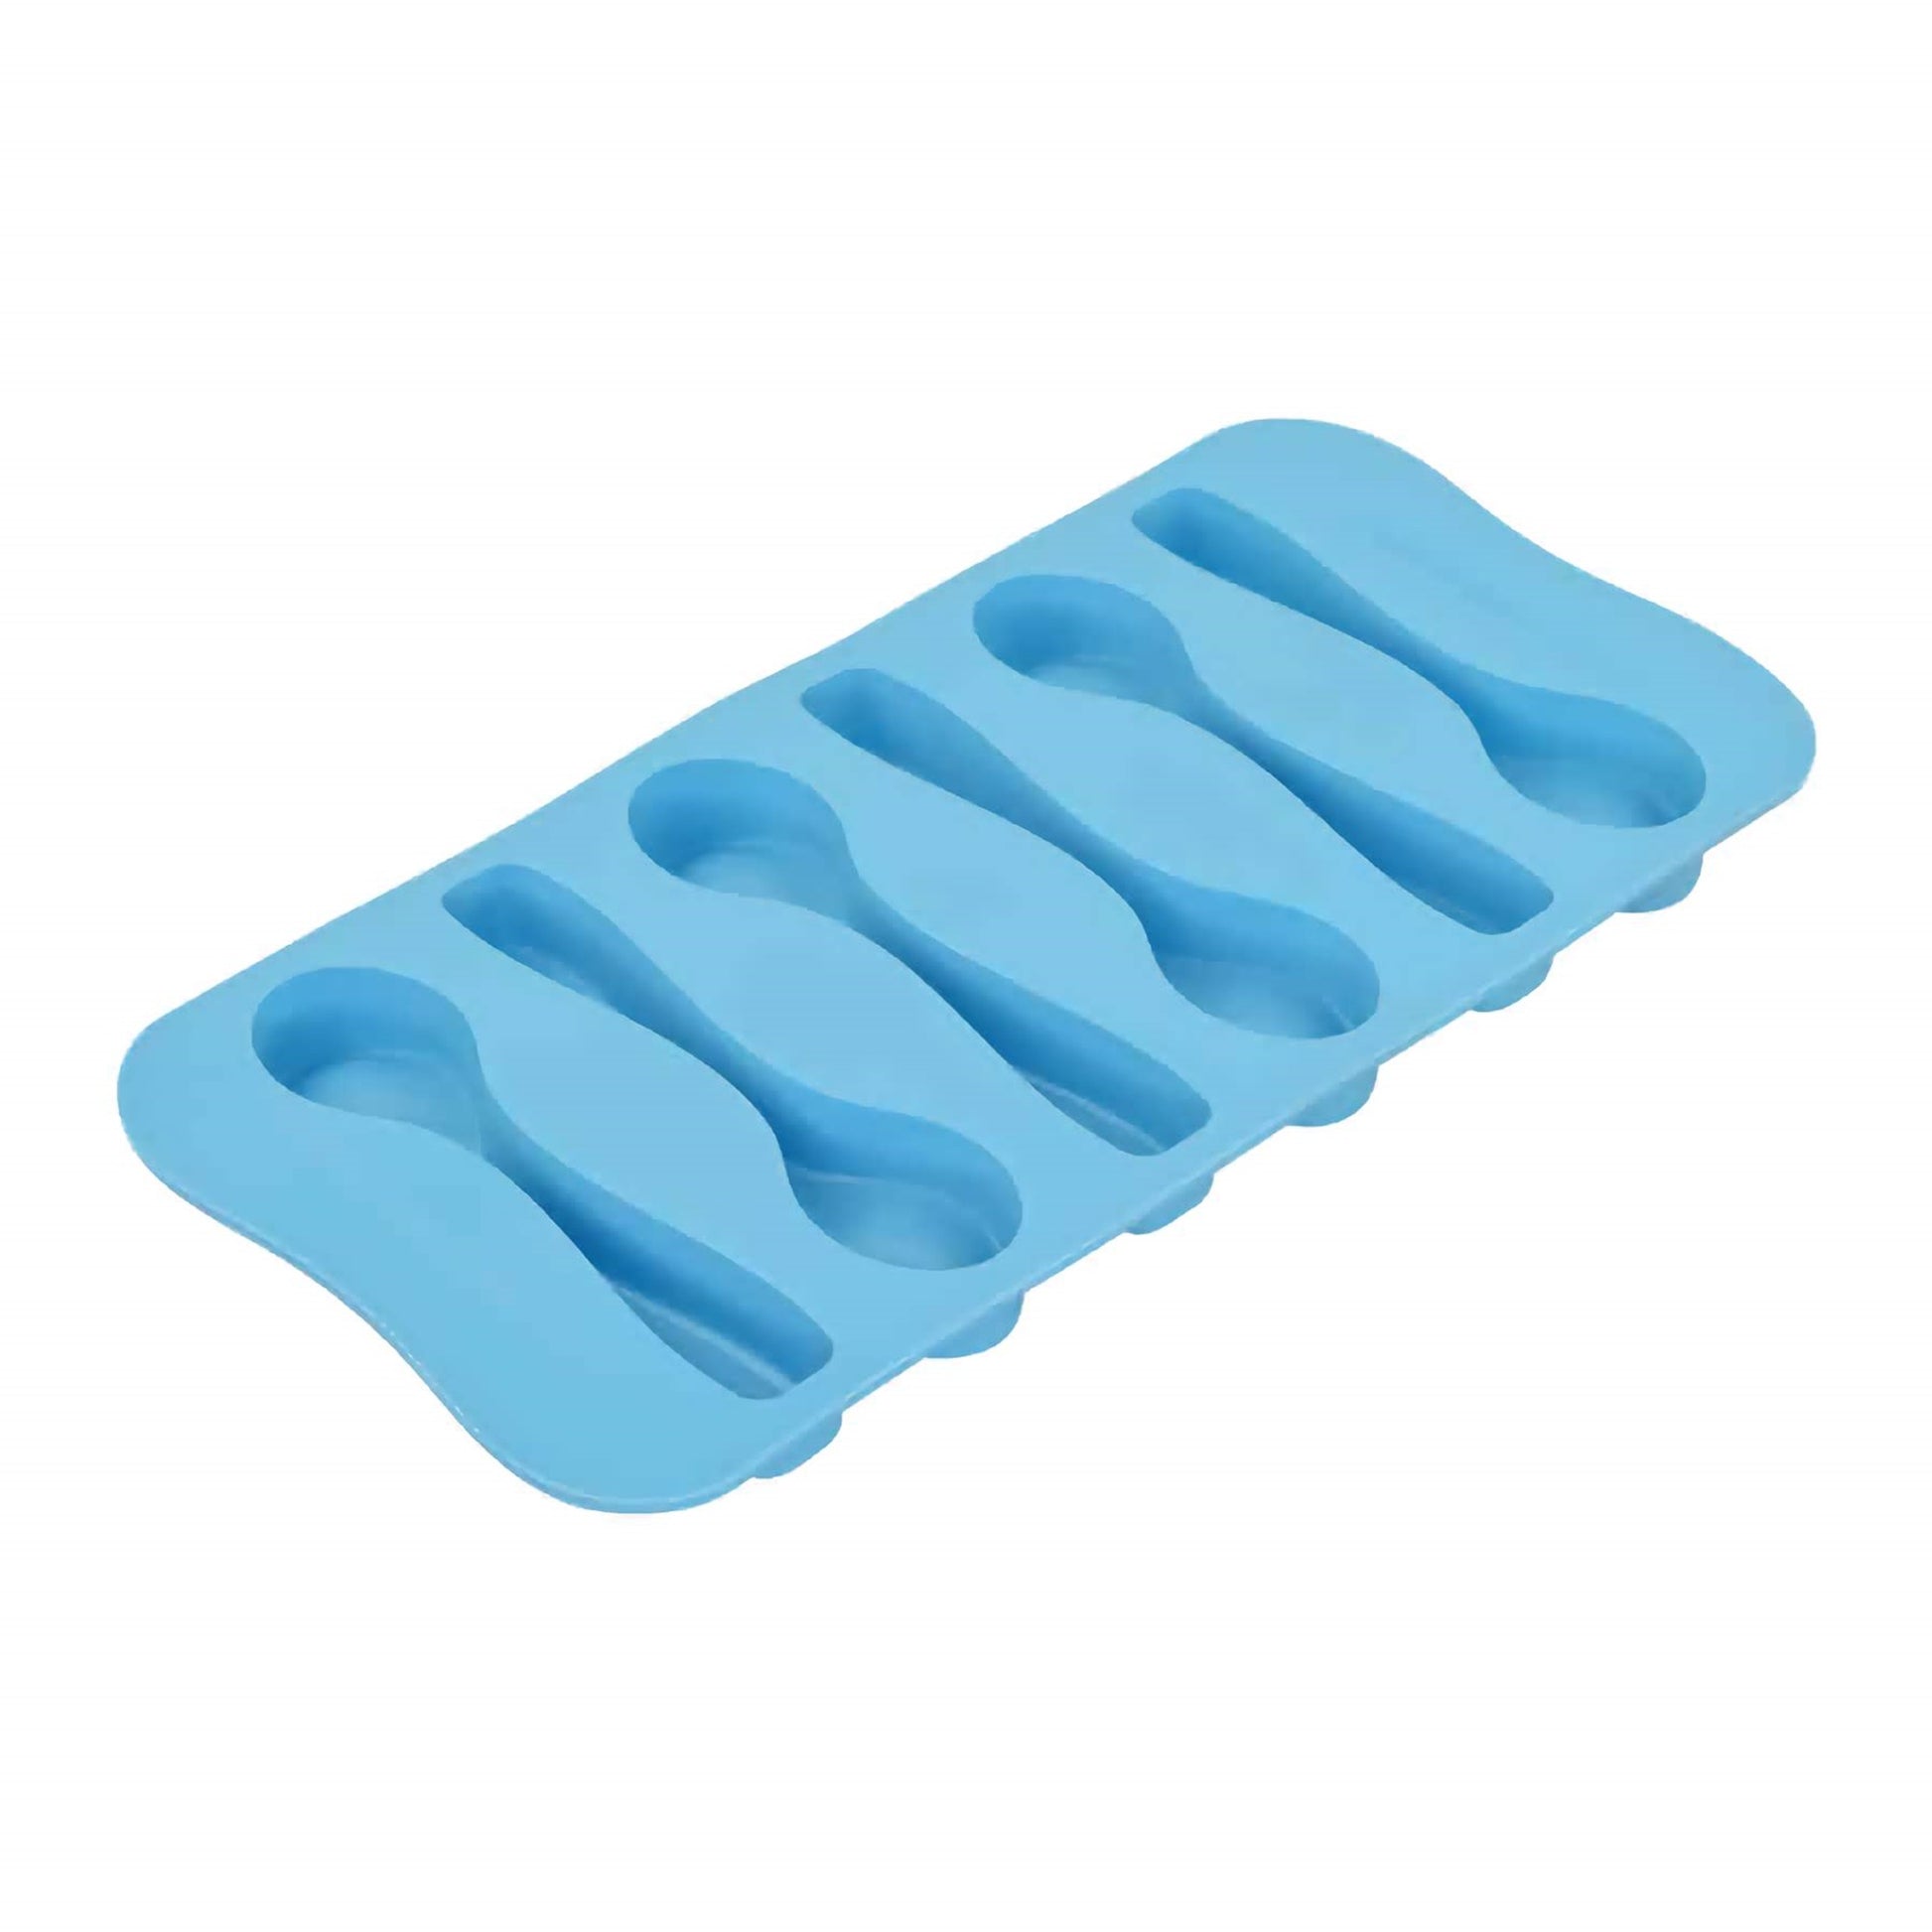 A blue silicone mold with six spoon-shaped cavities presented on a flat surface. The mold is designed to craft chocolate spoons, each cavity capturing the traditional spoon shape with a deep bowl and an extended handle. The mold's design is streamlined for easy filling and the flexible silicone material indicates a non-stick surface for effortless release of the finished chocolates.